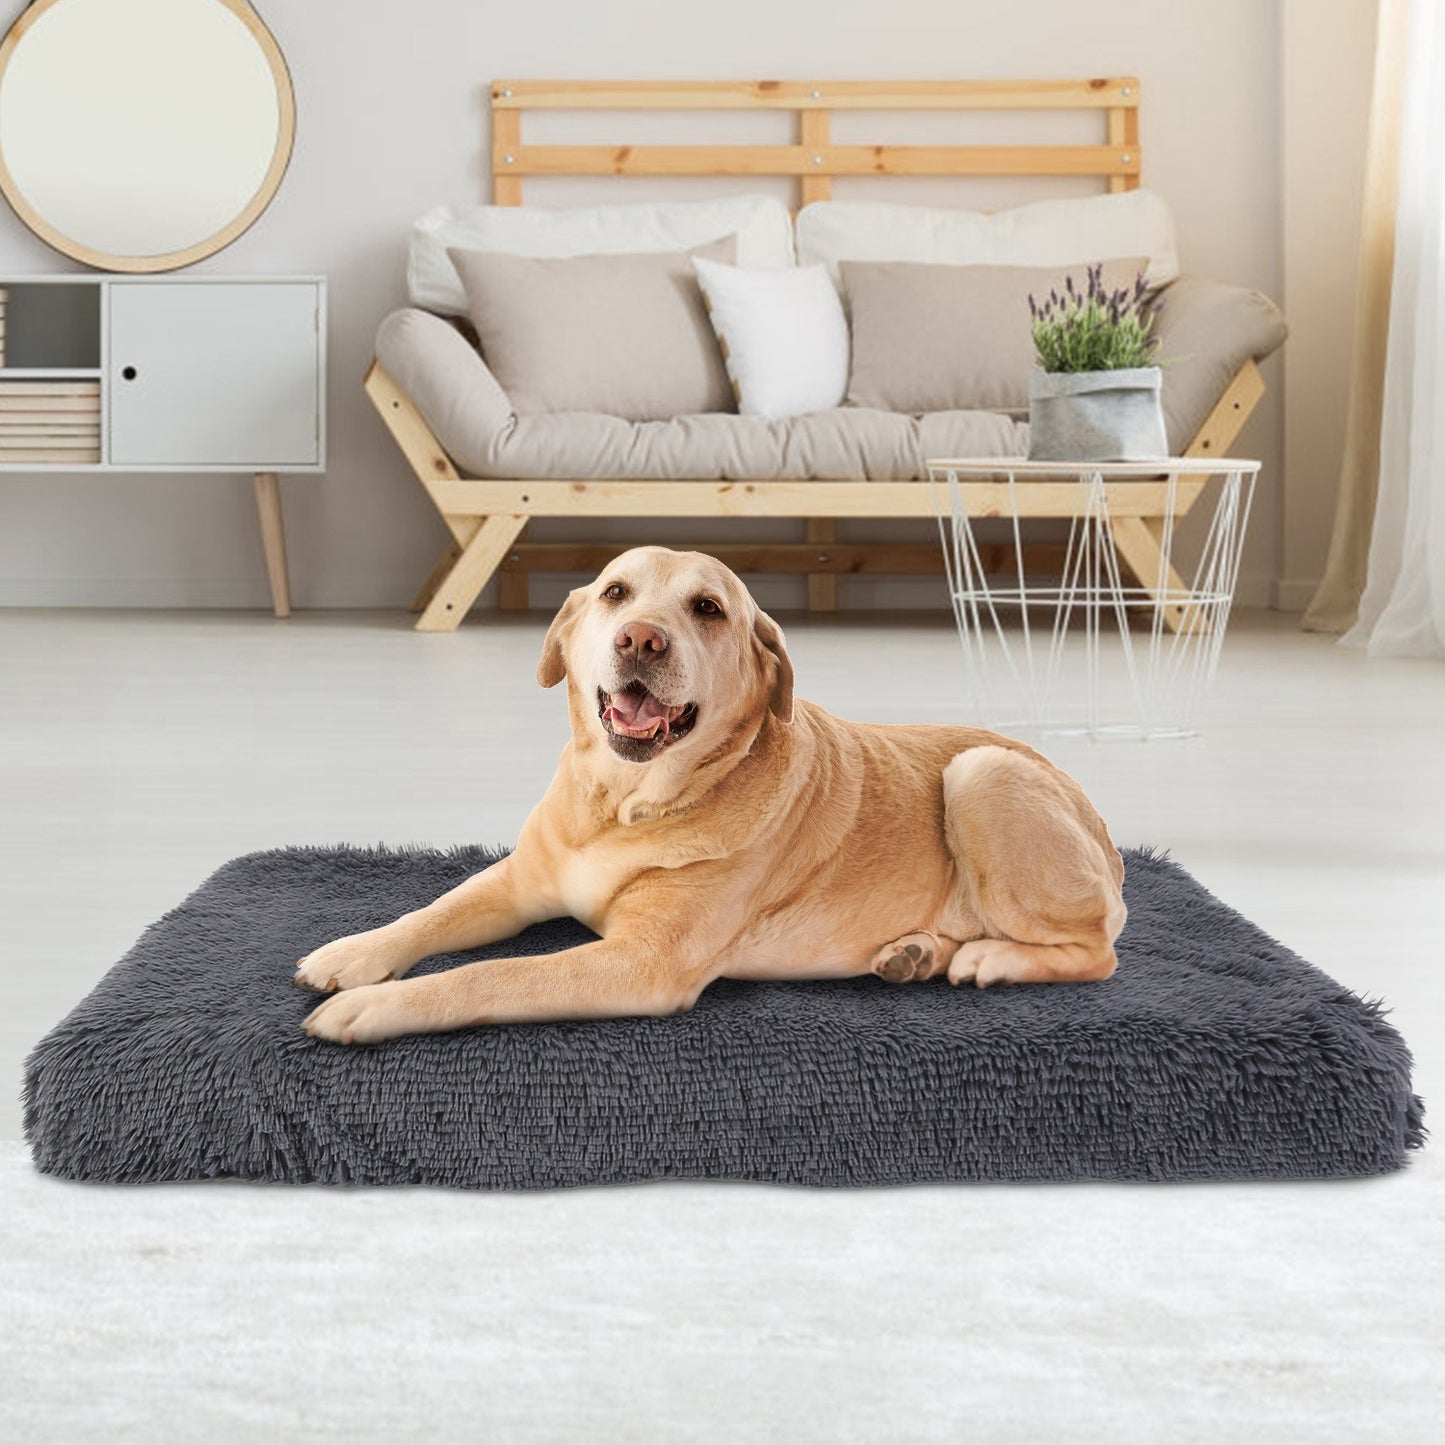 Dog Bed Soft Plush Cushion Cozy Warm Pet Crate Mat Dog Carpet Mattress with Long Plush for S M Dogs